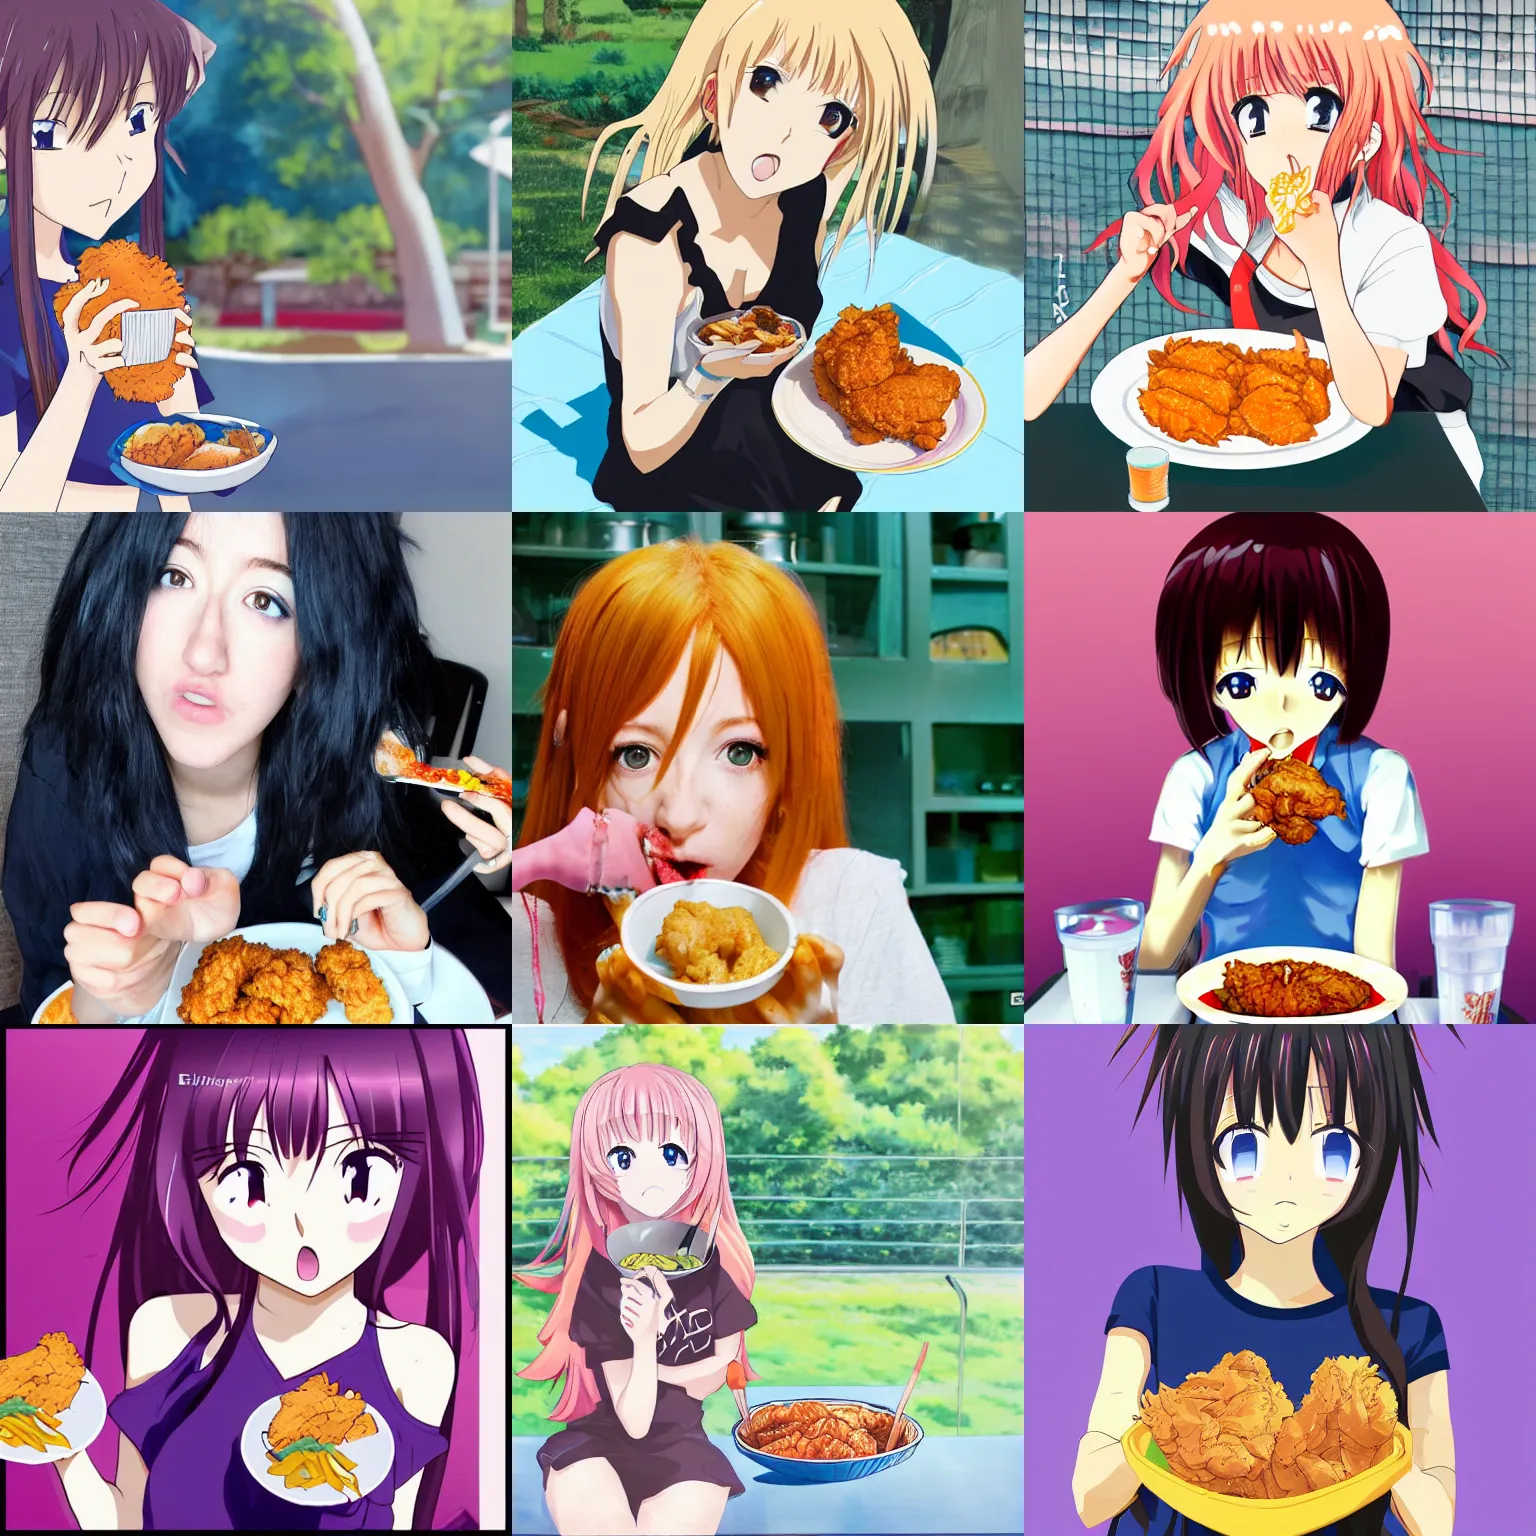 Prompt: anime girl eating fried chicken by ellie goulding